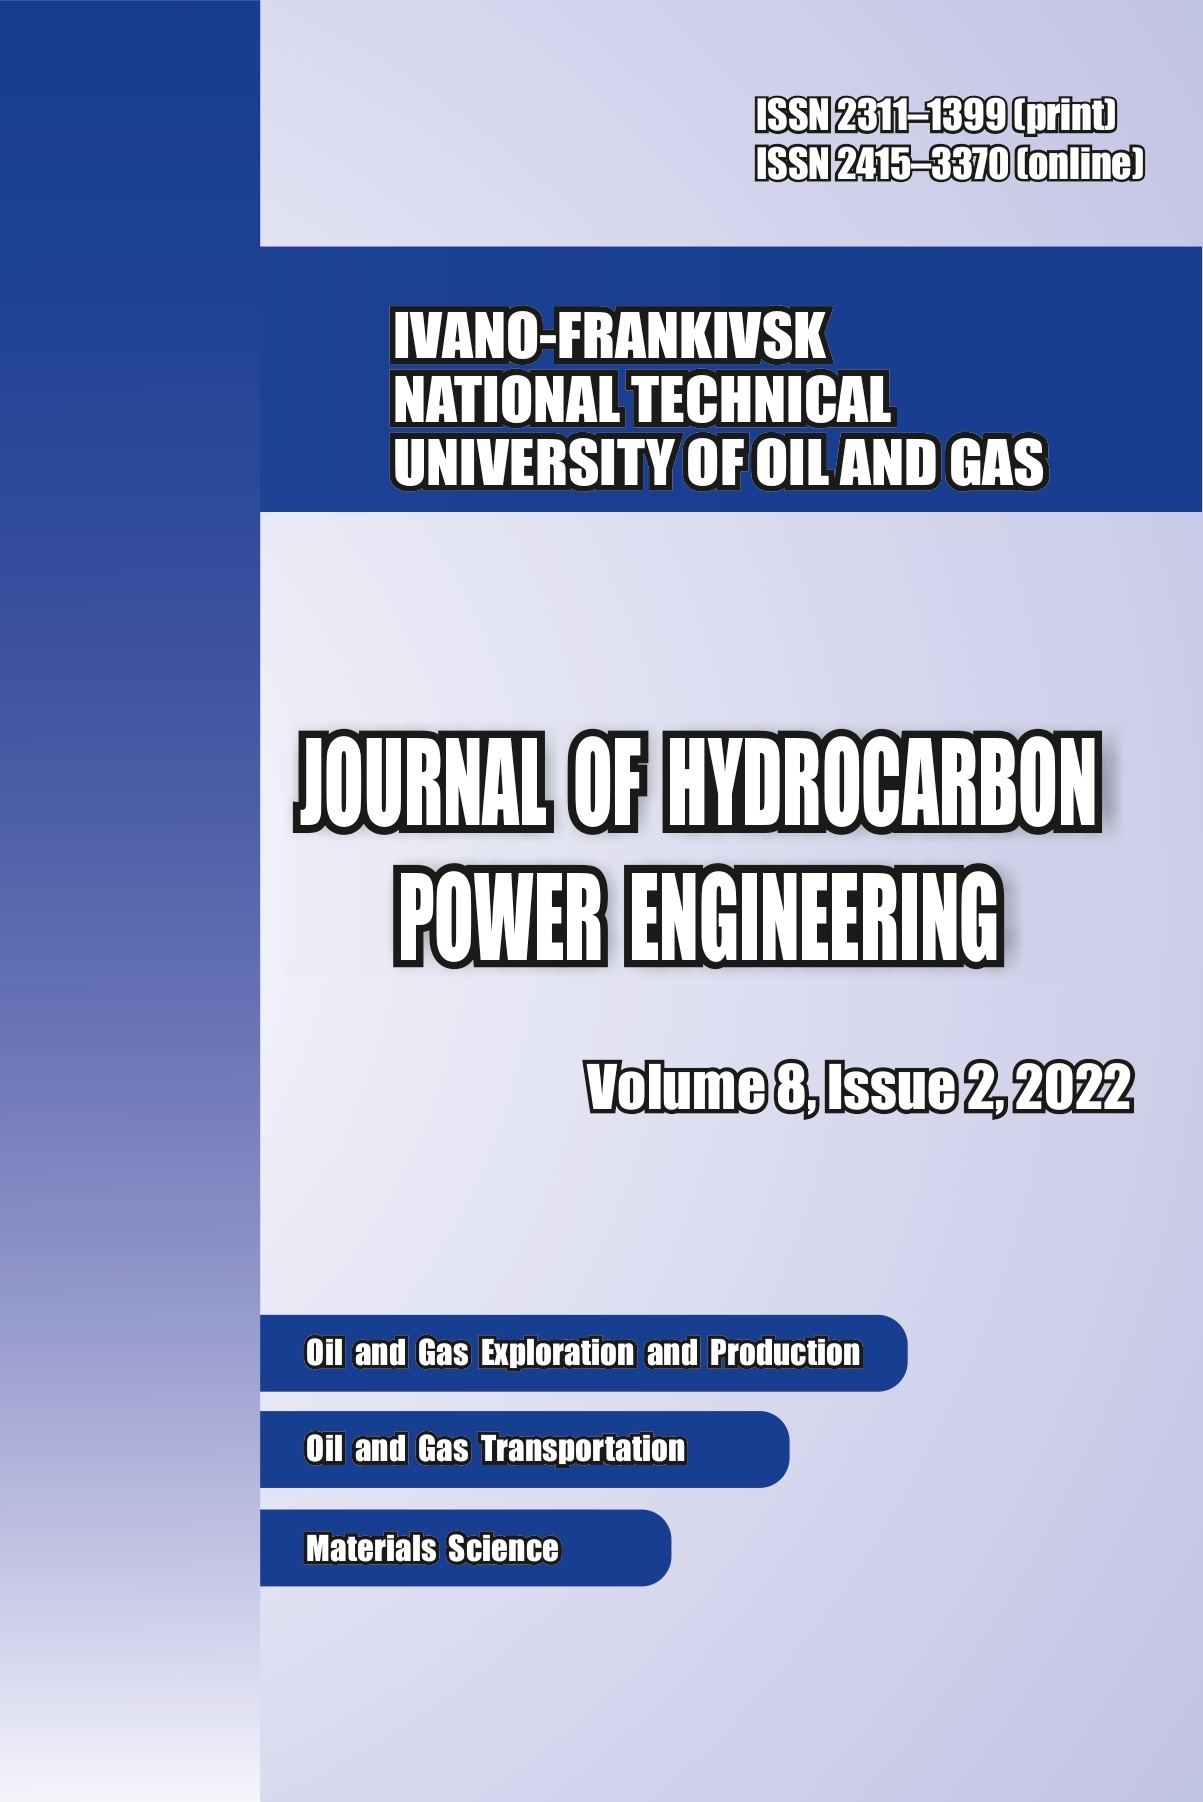 					View Vol. 9 No. 2 (2022): JOURNAL OF HYDROCARBON POWER ENGINEERING
				